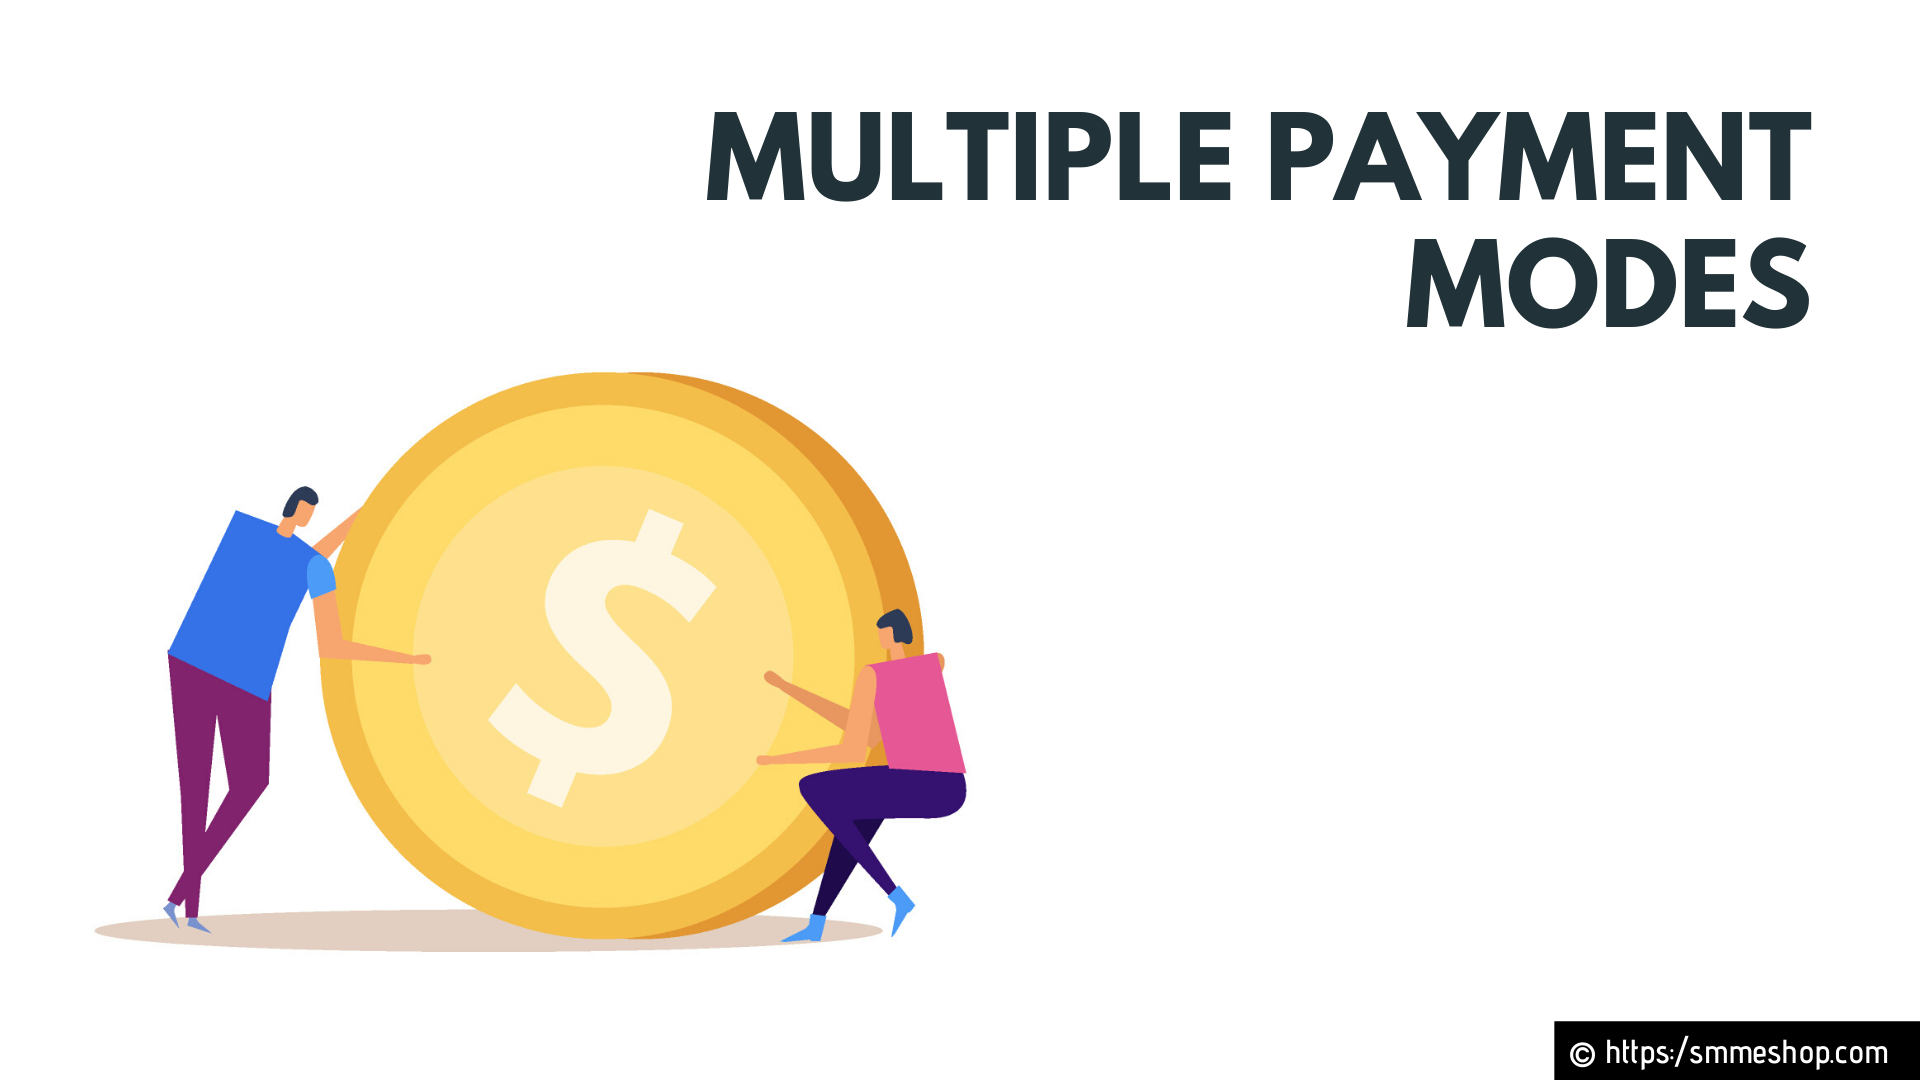 Multiple payment modes